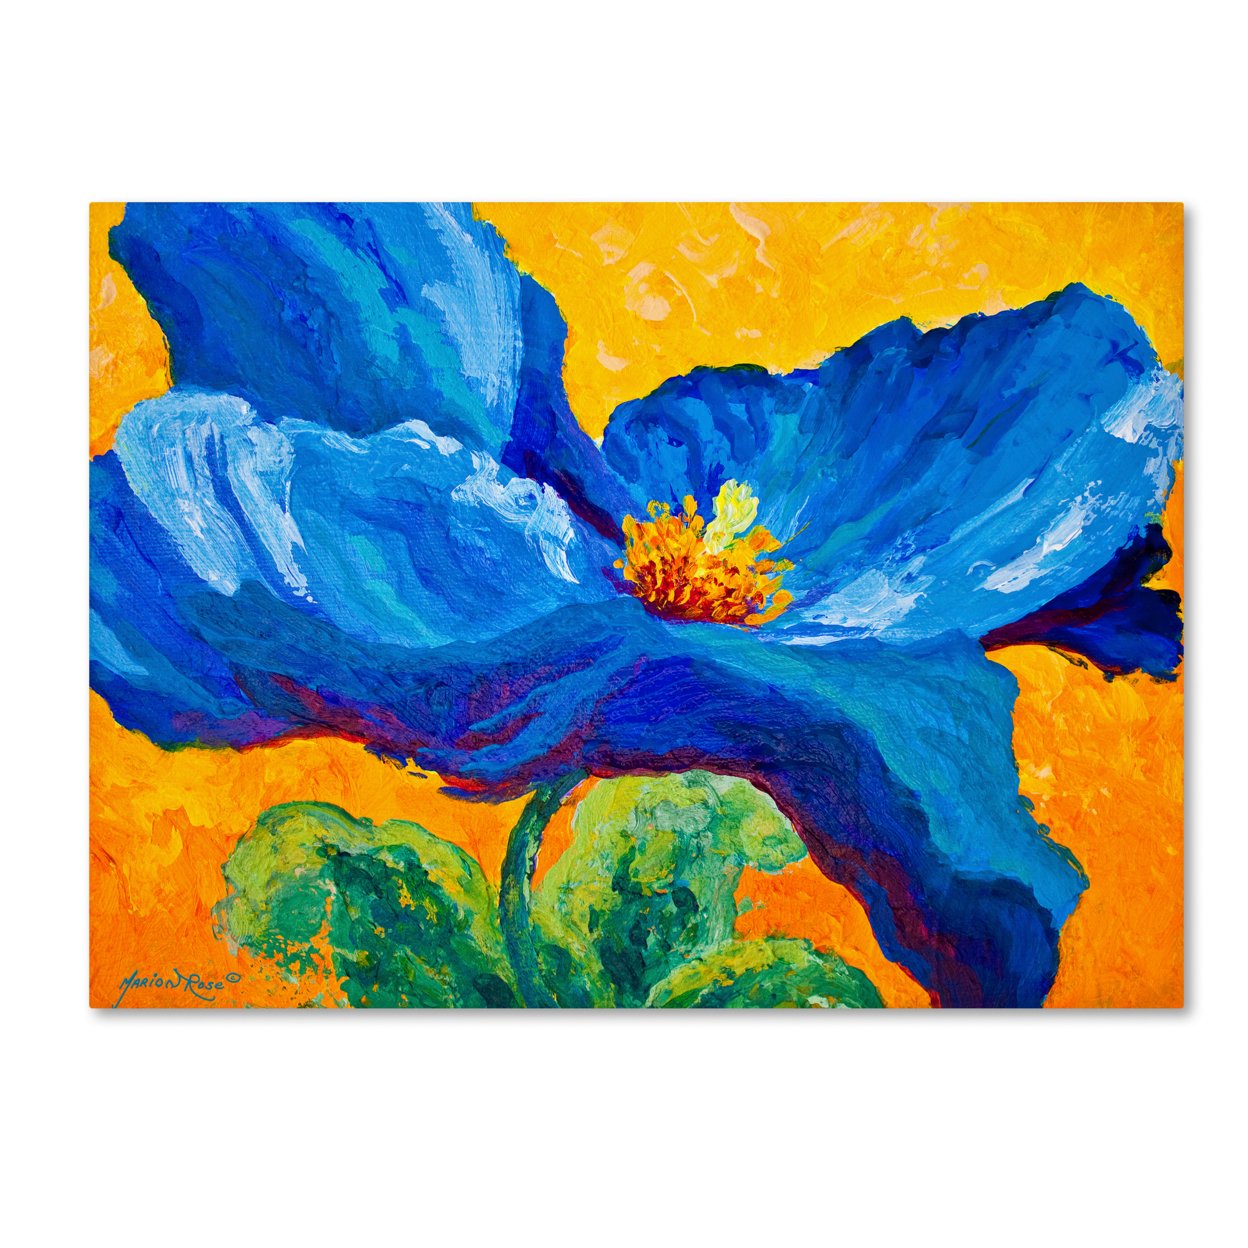 Marion Rose 'Blue Poppy 2' Ready To Hang Canvas Art 24 X 32 Inches Made In USA